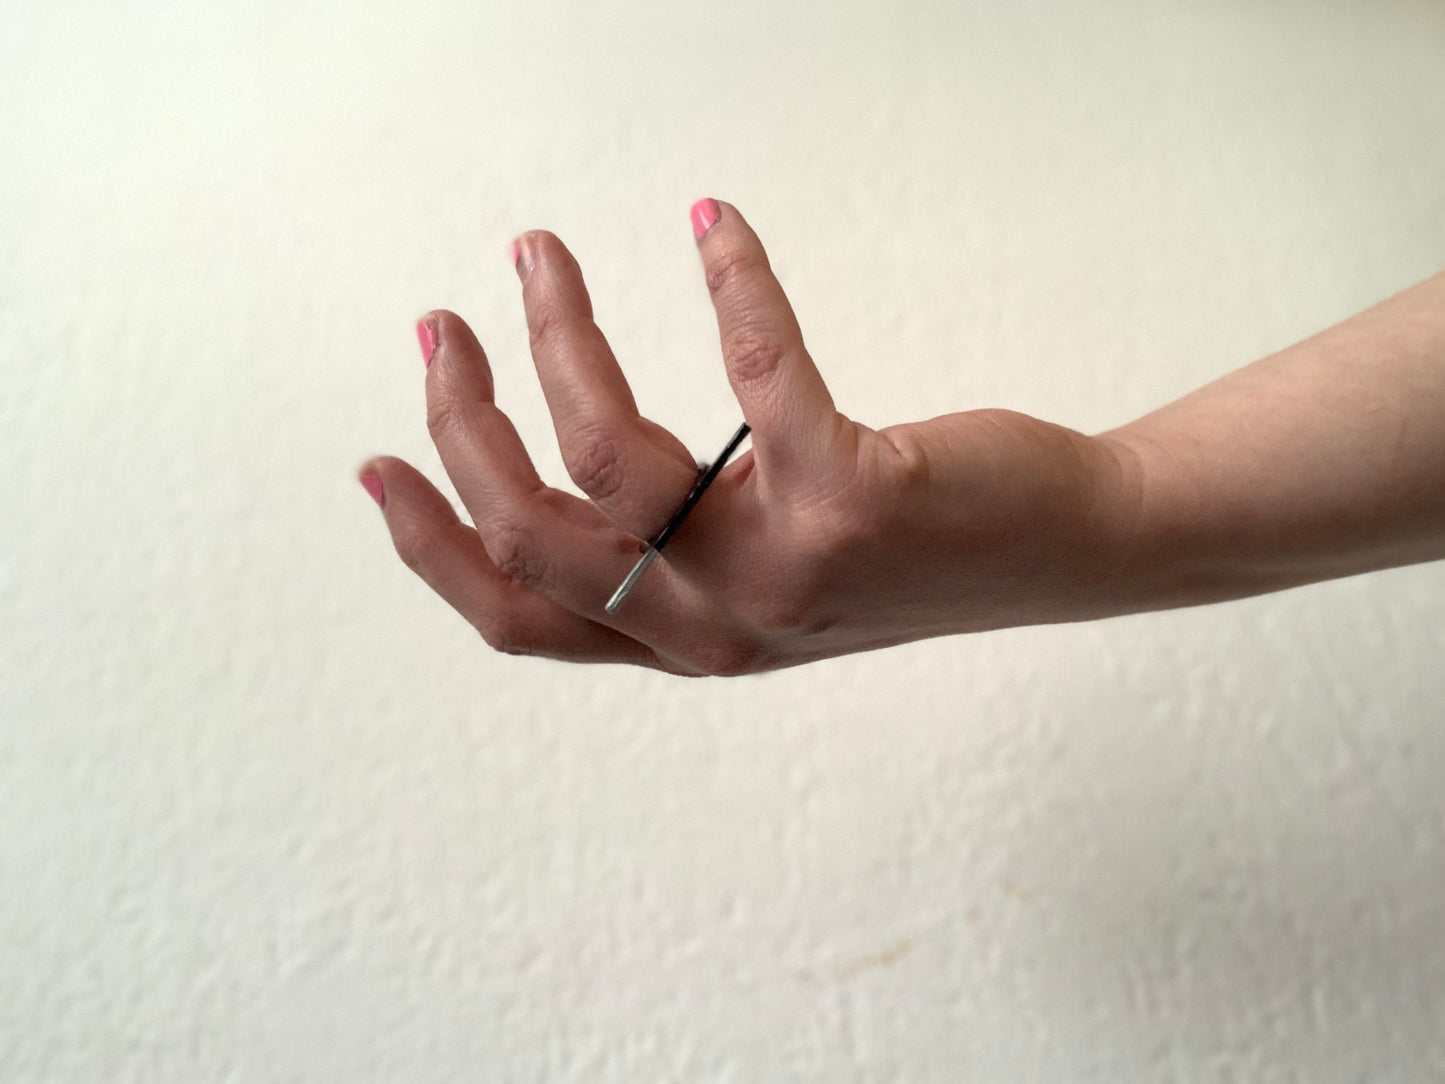 A hand is reaching into the frame across a white background. The hand is turned up like it may be recieving something. On the ring finger is a 3D printed ring that has a bar across the top. The bar is dipped in metallic paint on one side and extends over the middle and pinky fingers. 